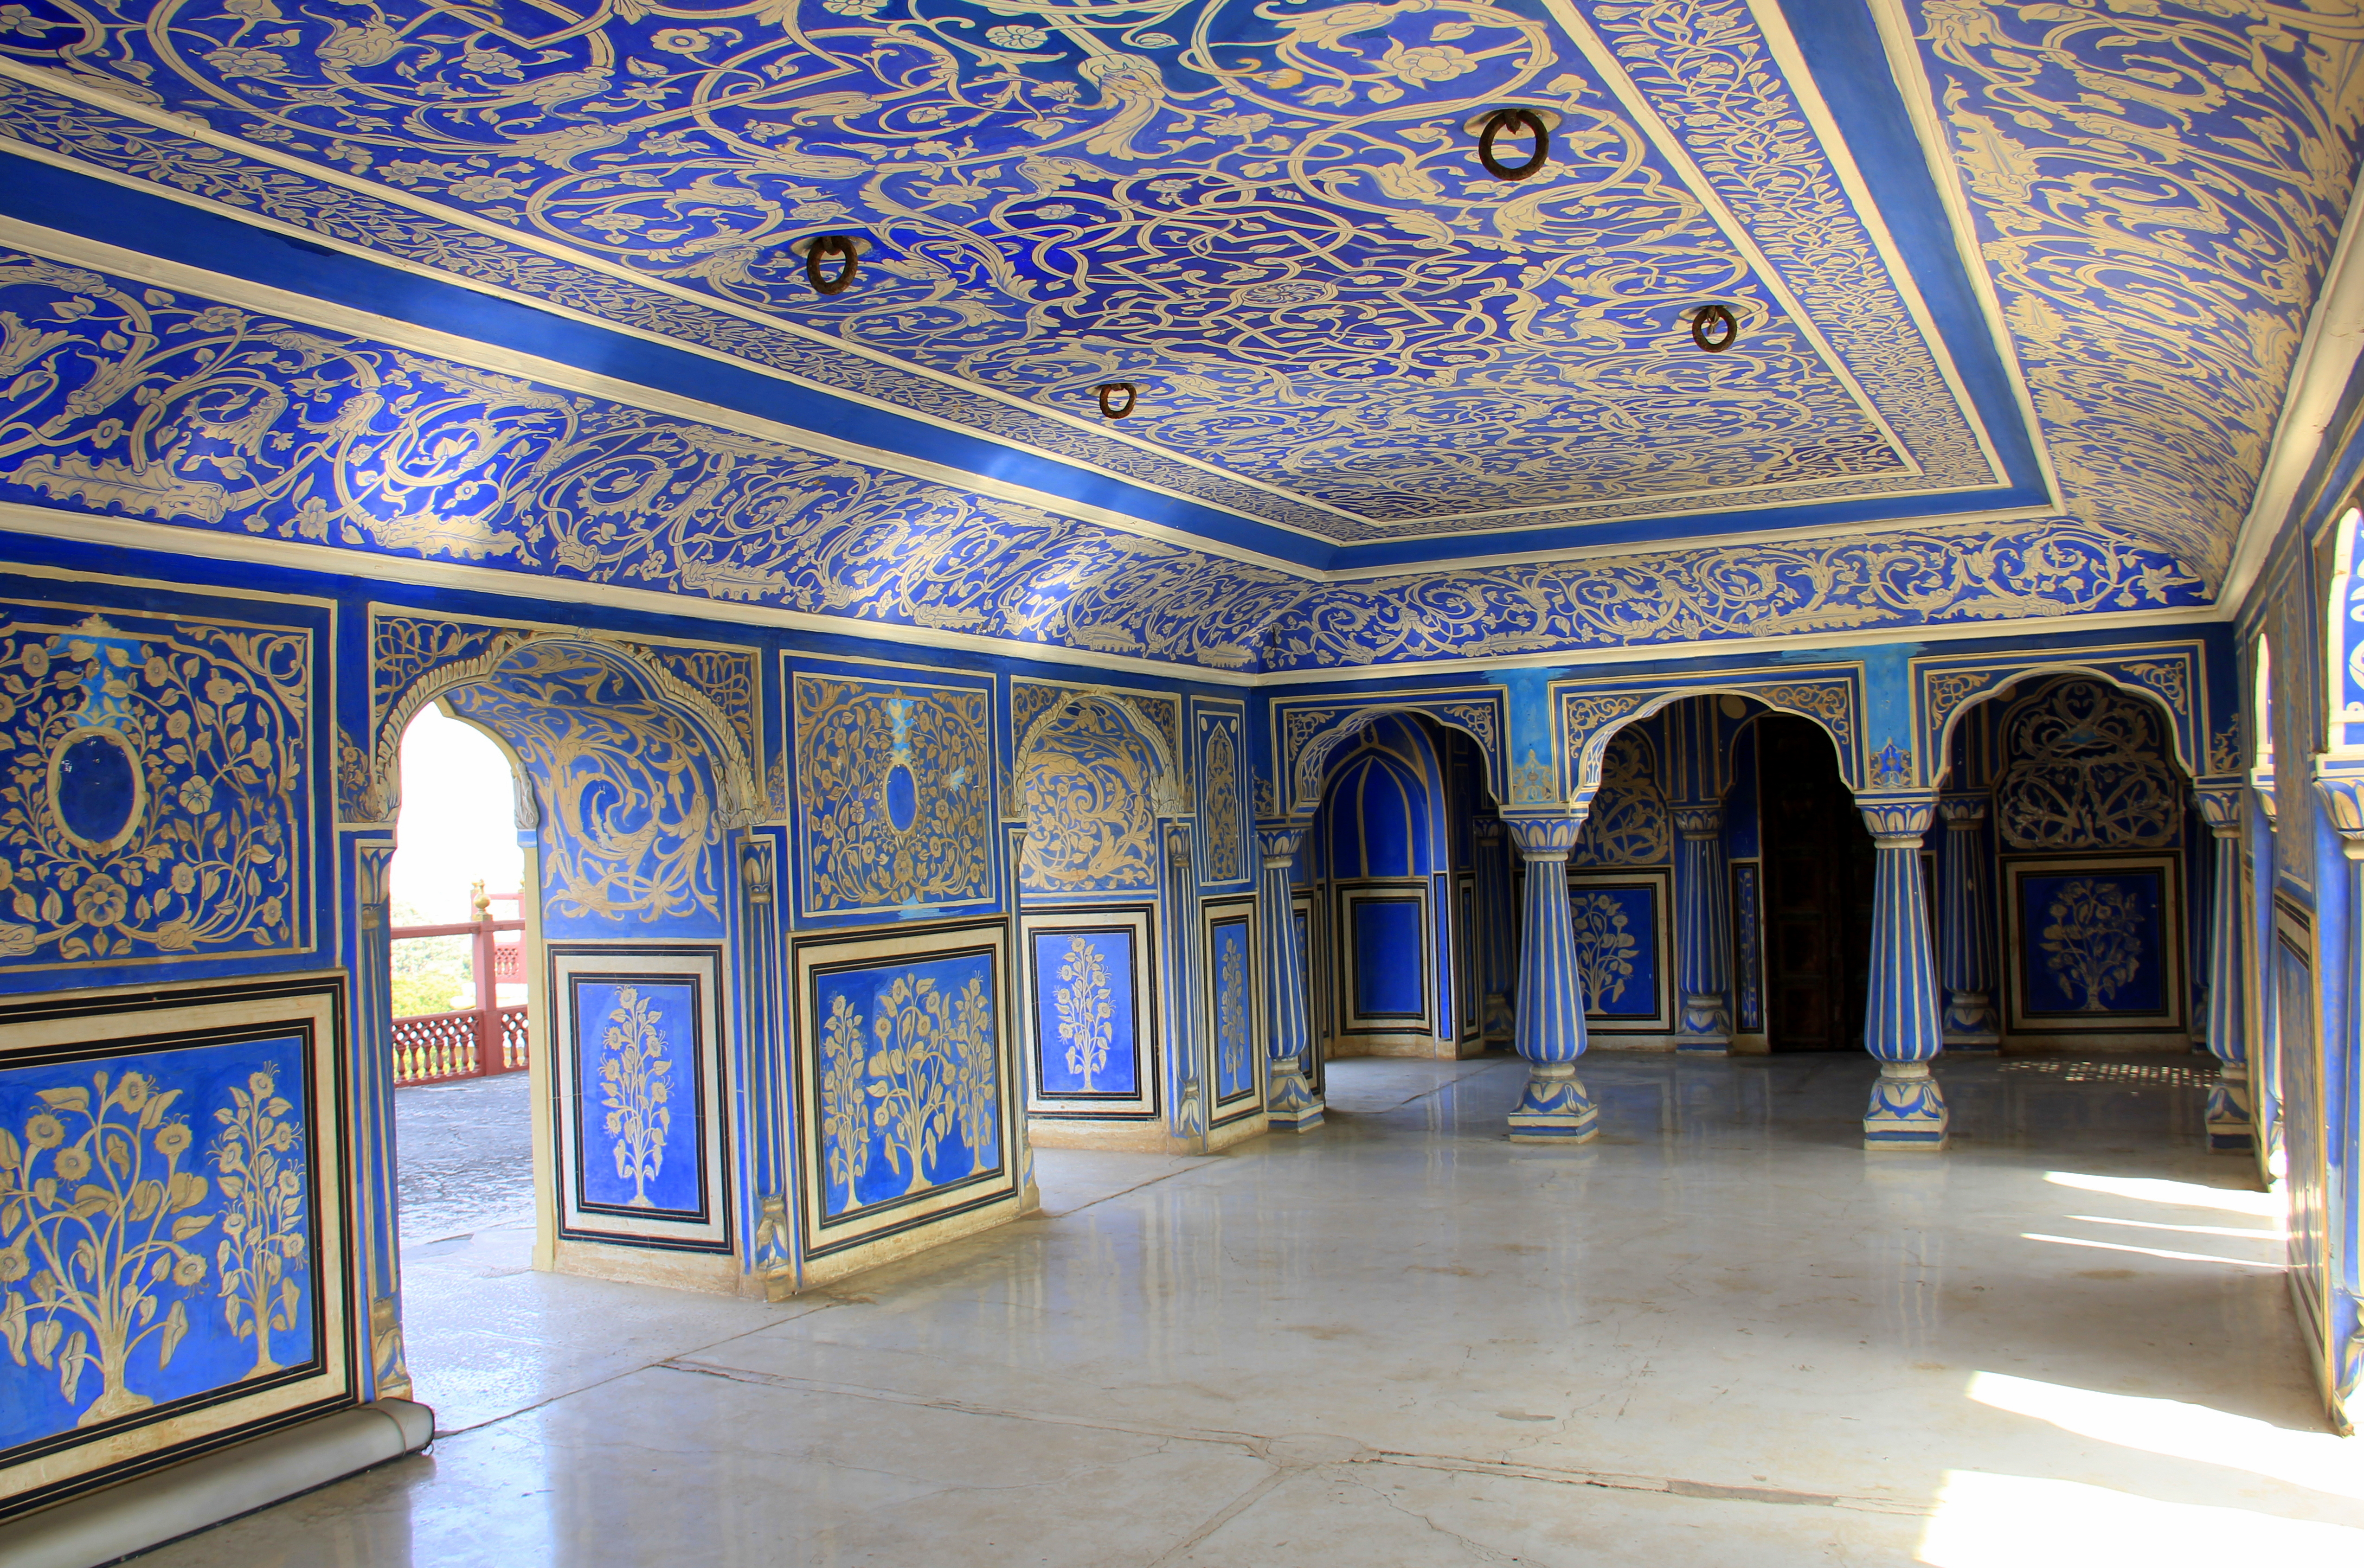 Things to do in Jaipur with kids